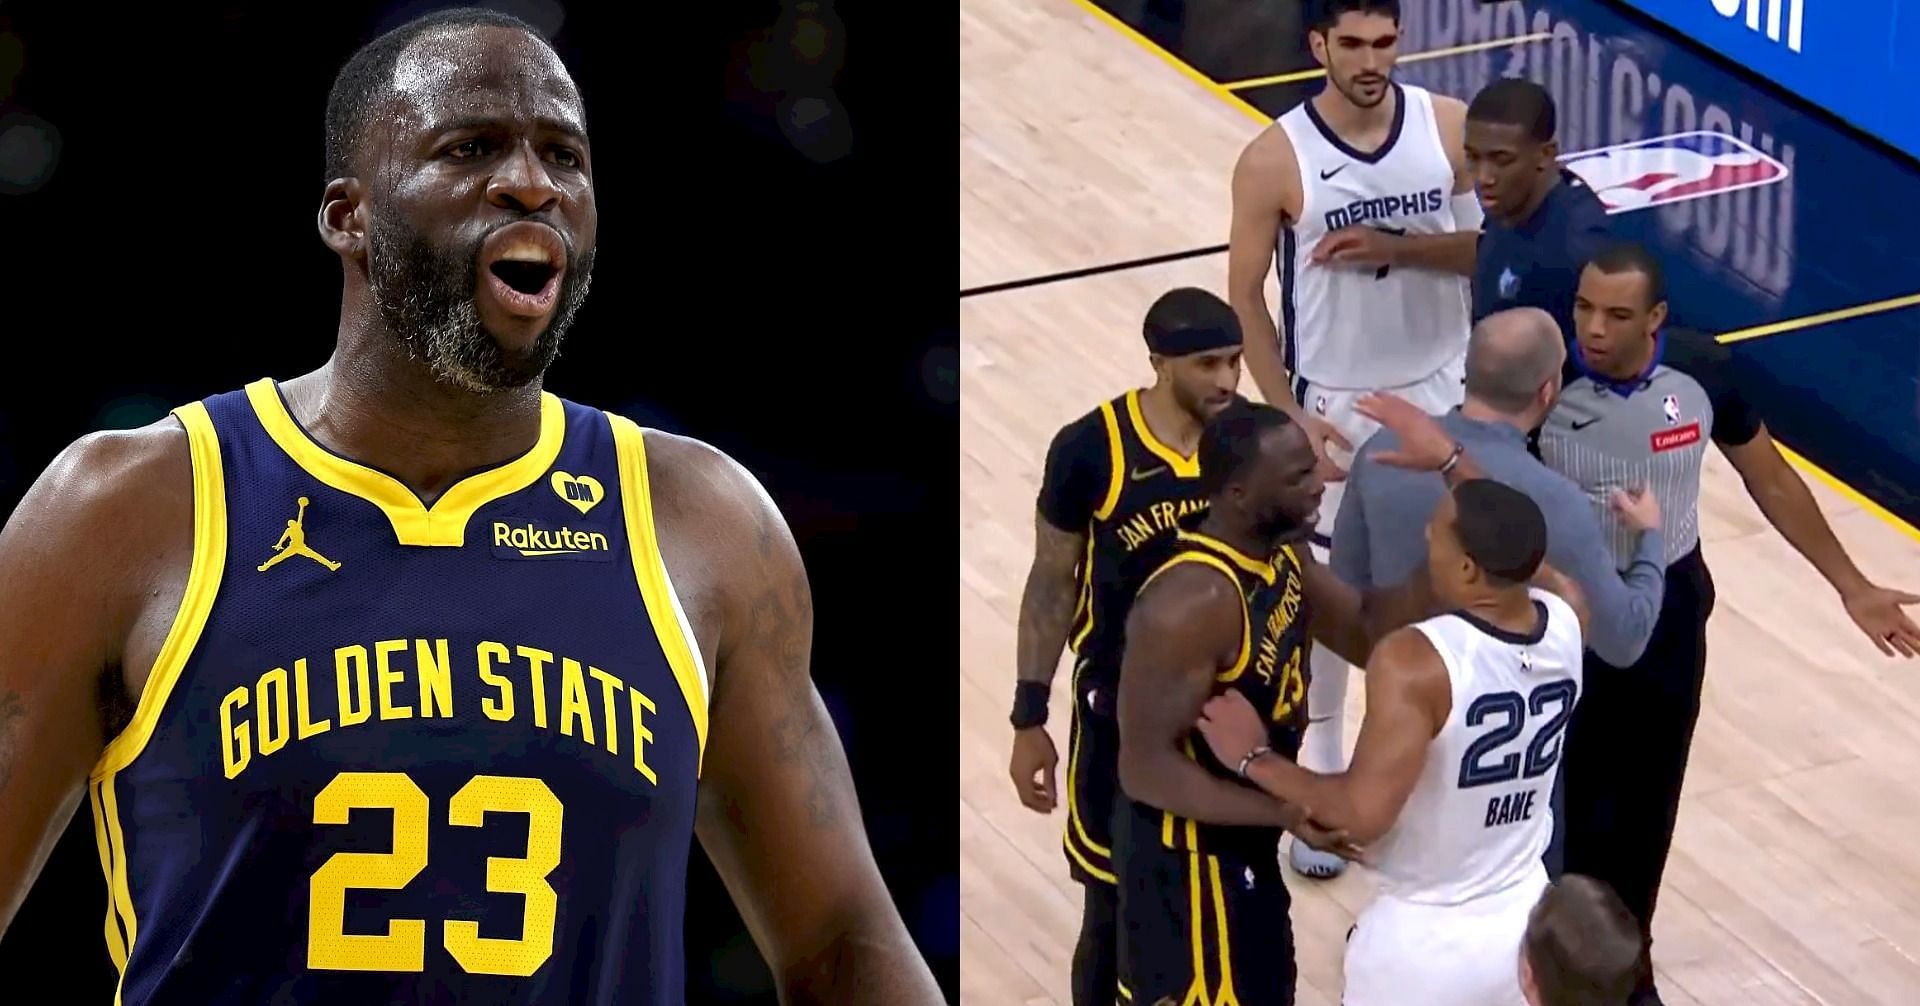 Draymond Green accuses Grizzlies of provocation to get him ejected